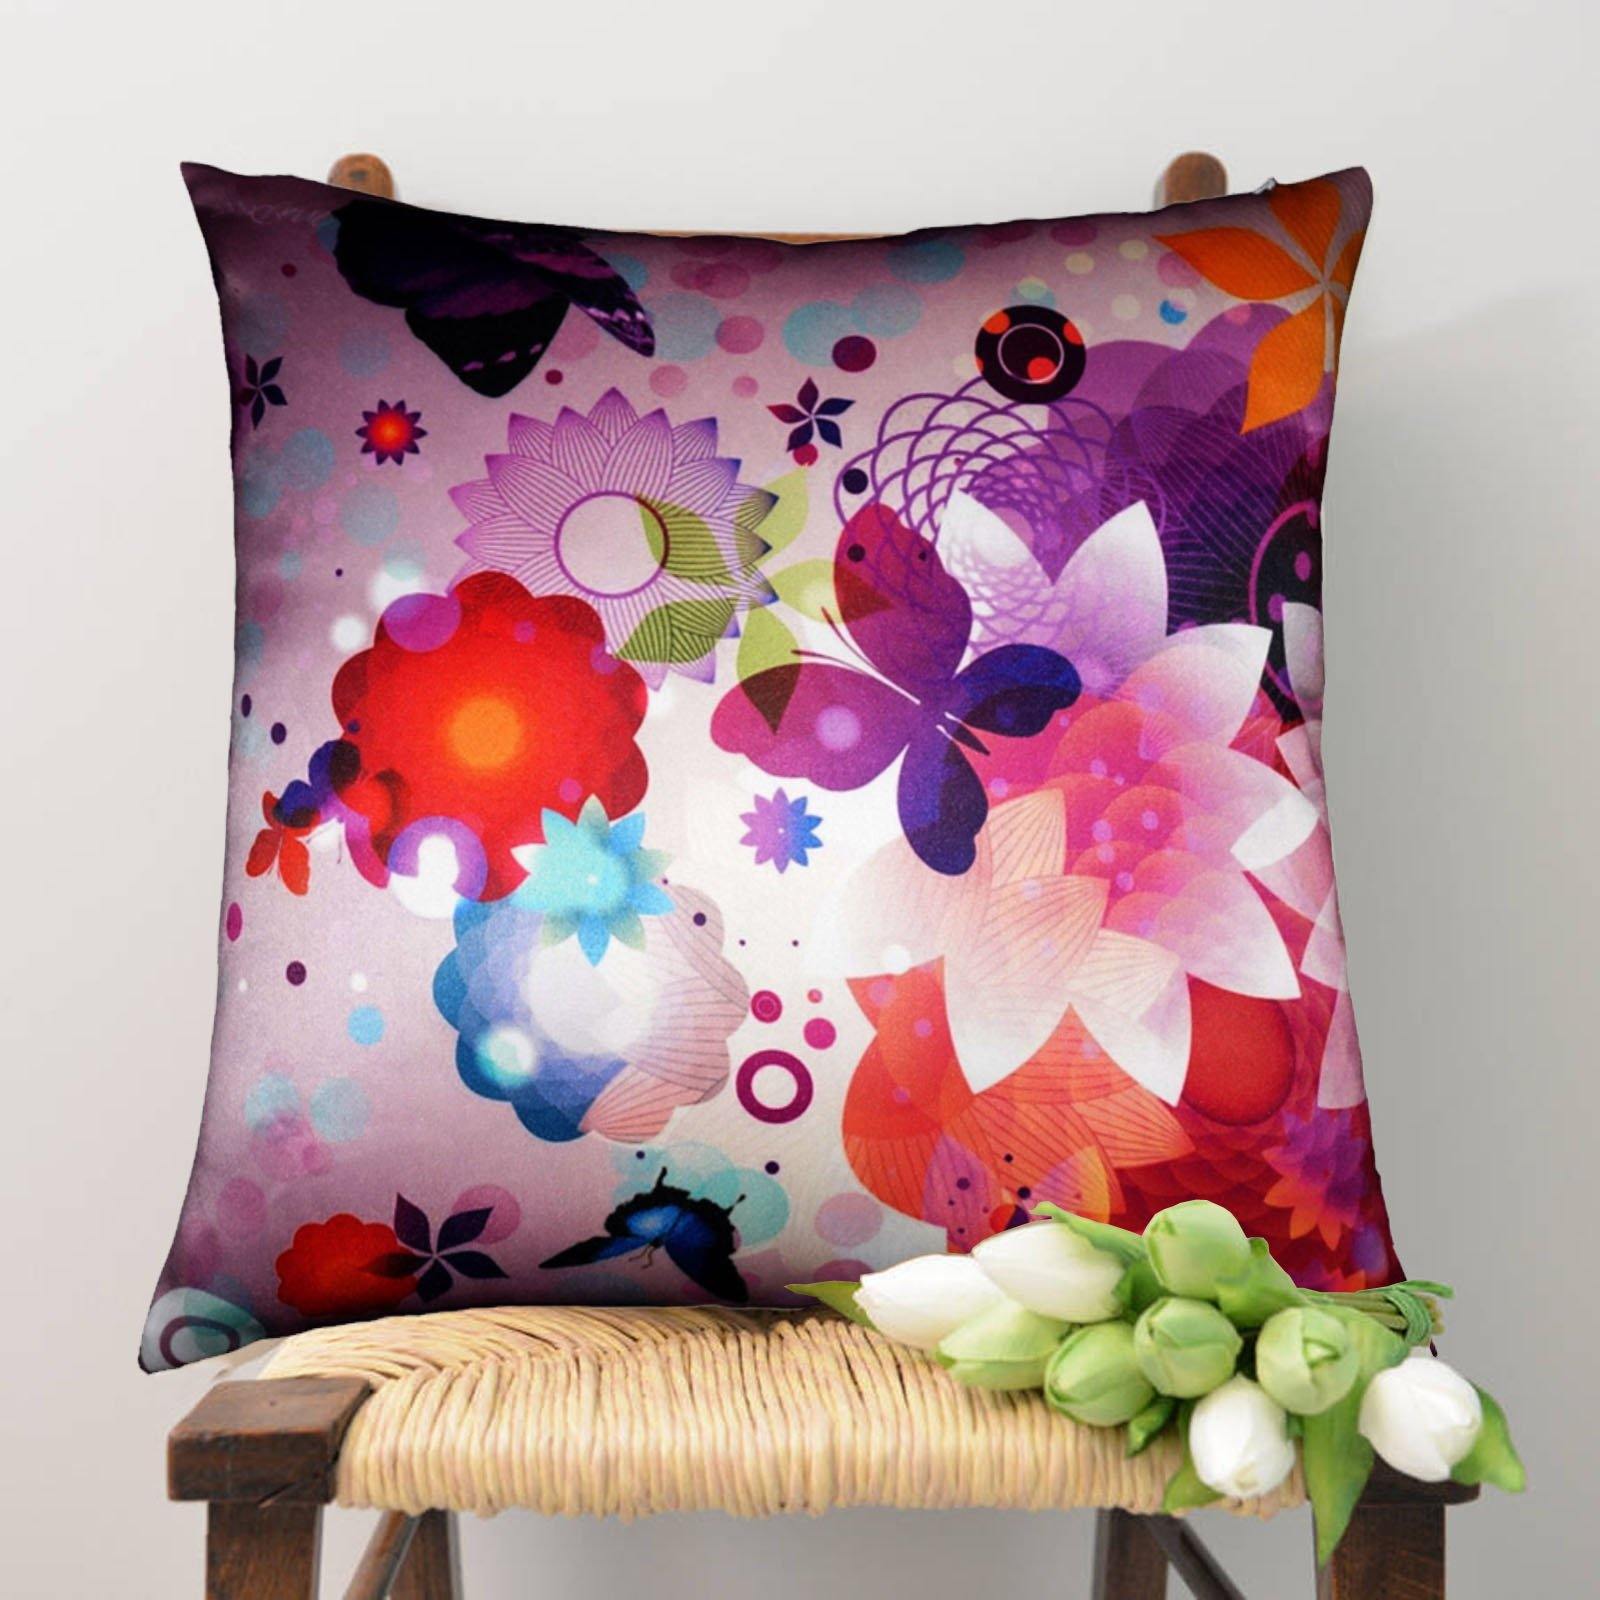 Lushomes Digital Printed Butterfly Cushion Cover on Ultra Premium Fabric - Lushomes